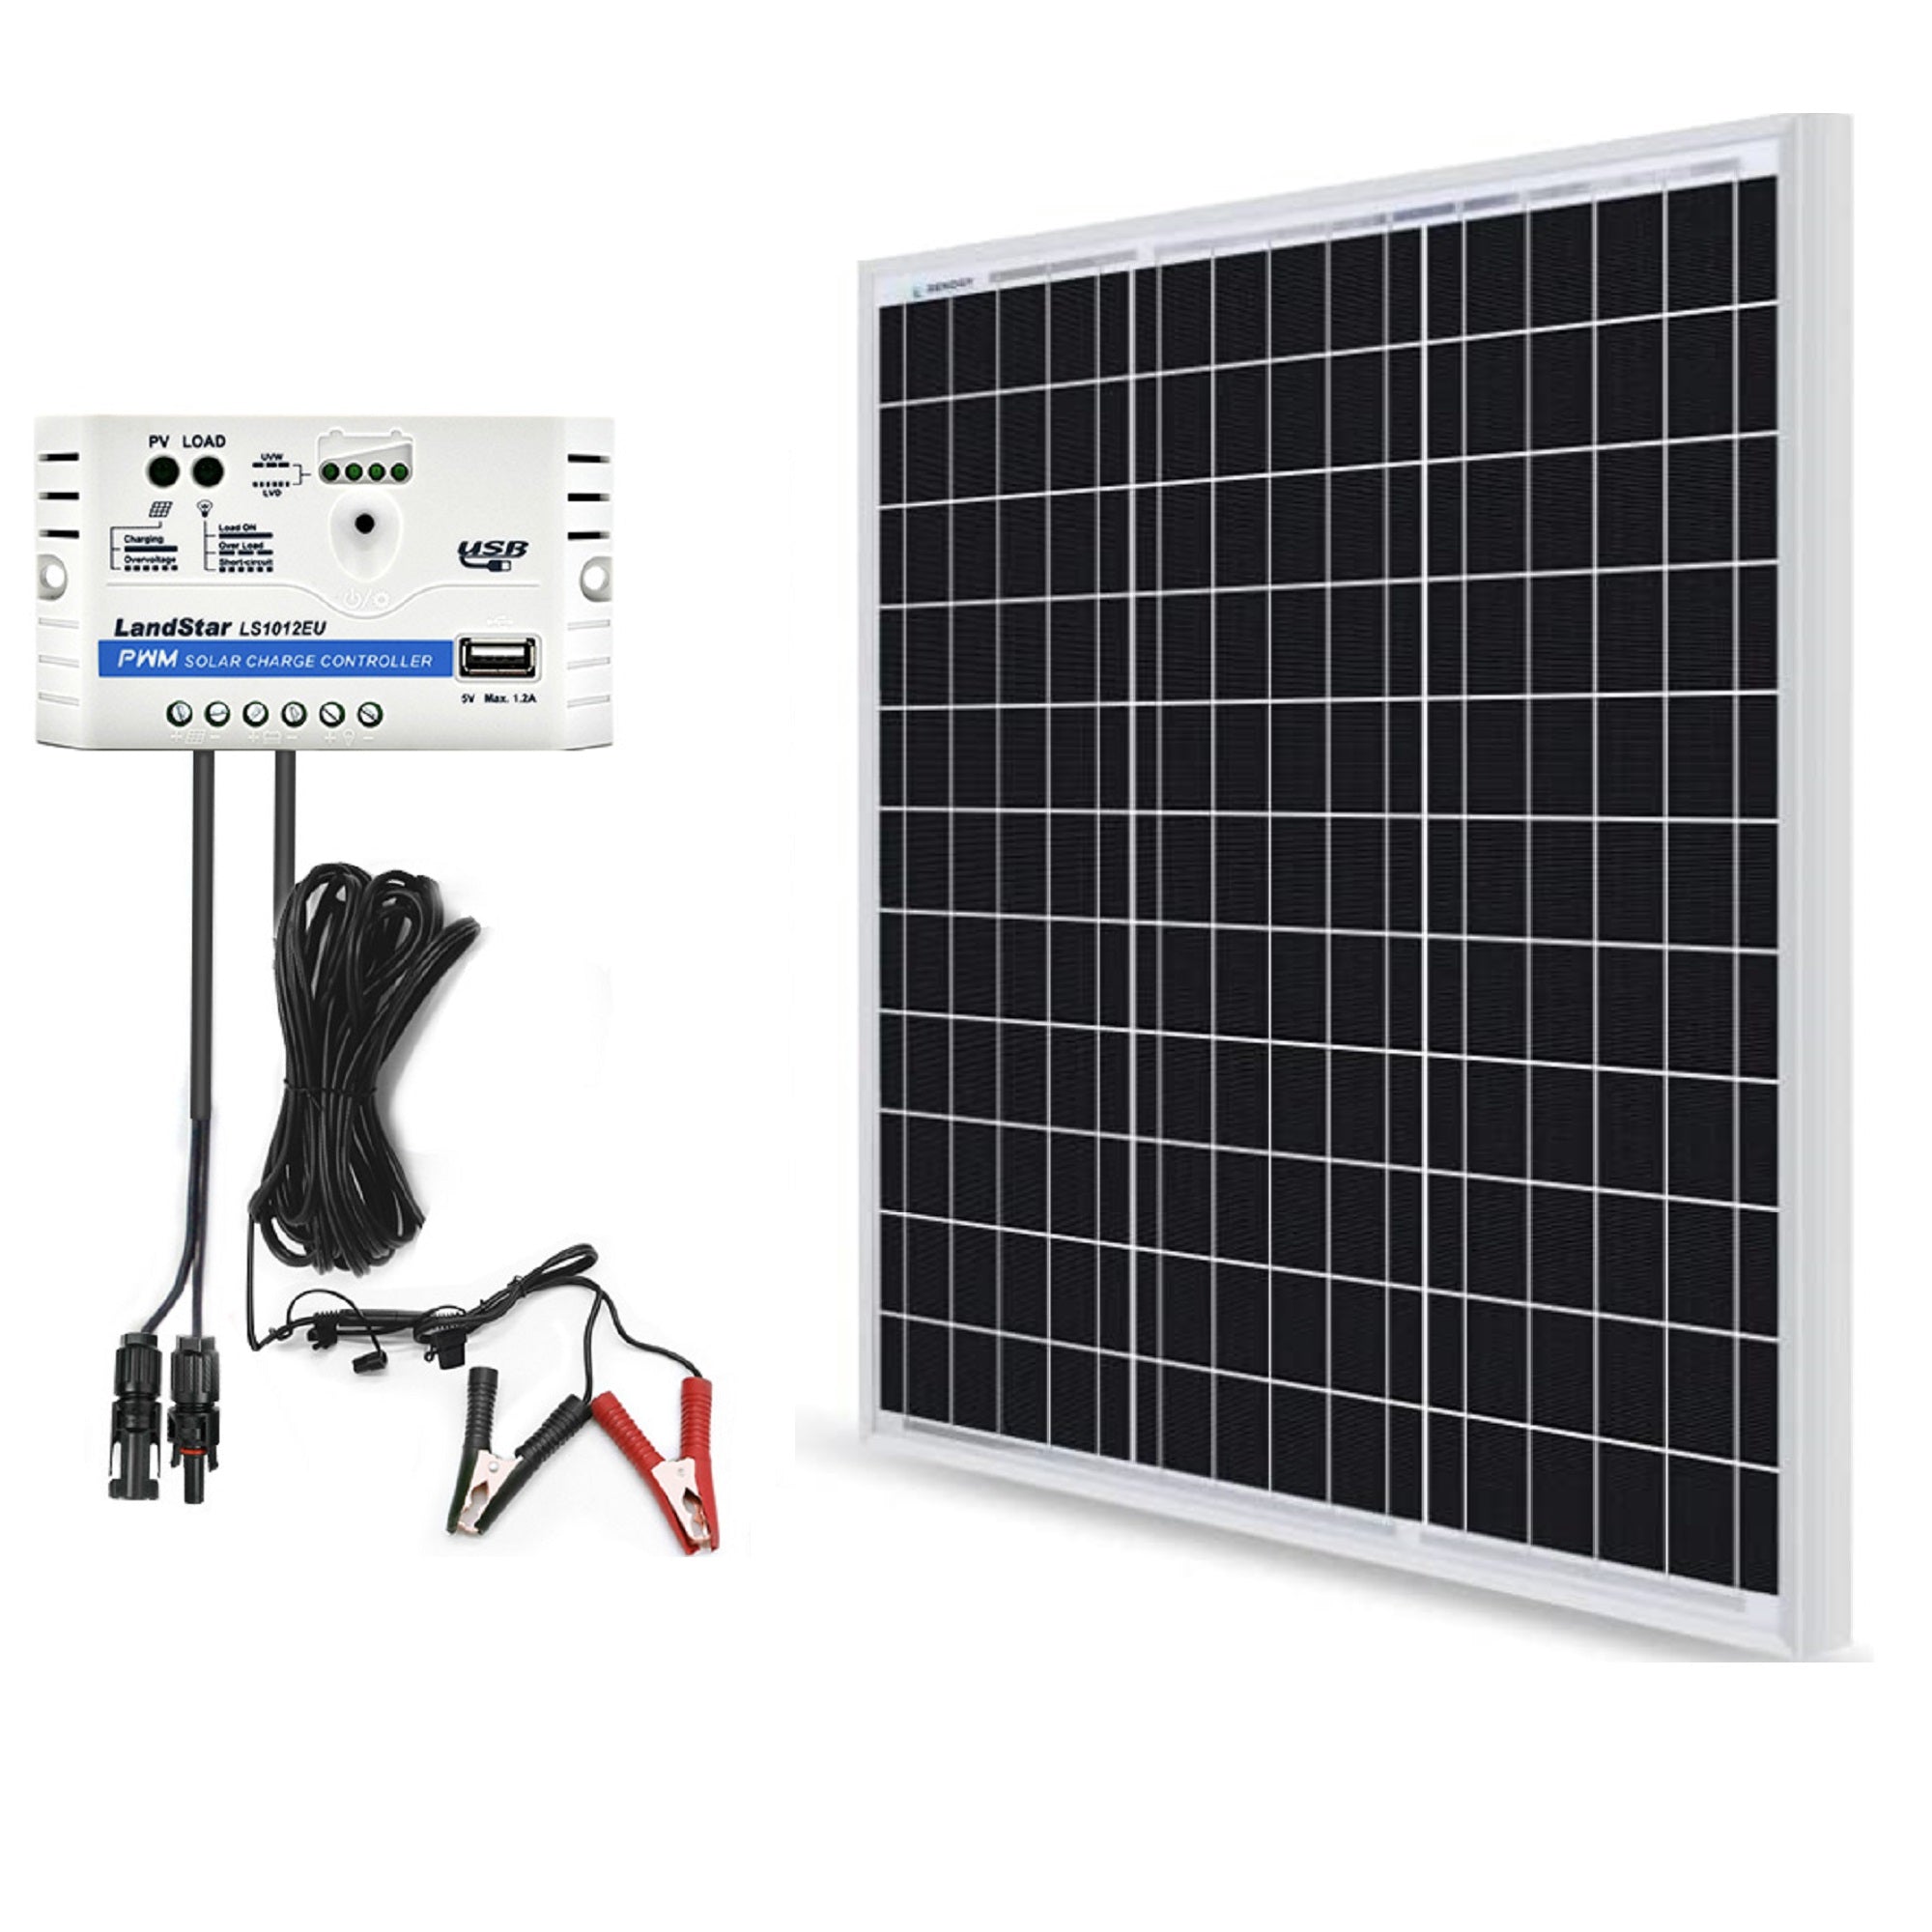 ACOPOWER 50W 12V Solar Charger Kit, 10A Charge Controller with Alligator Clips